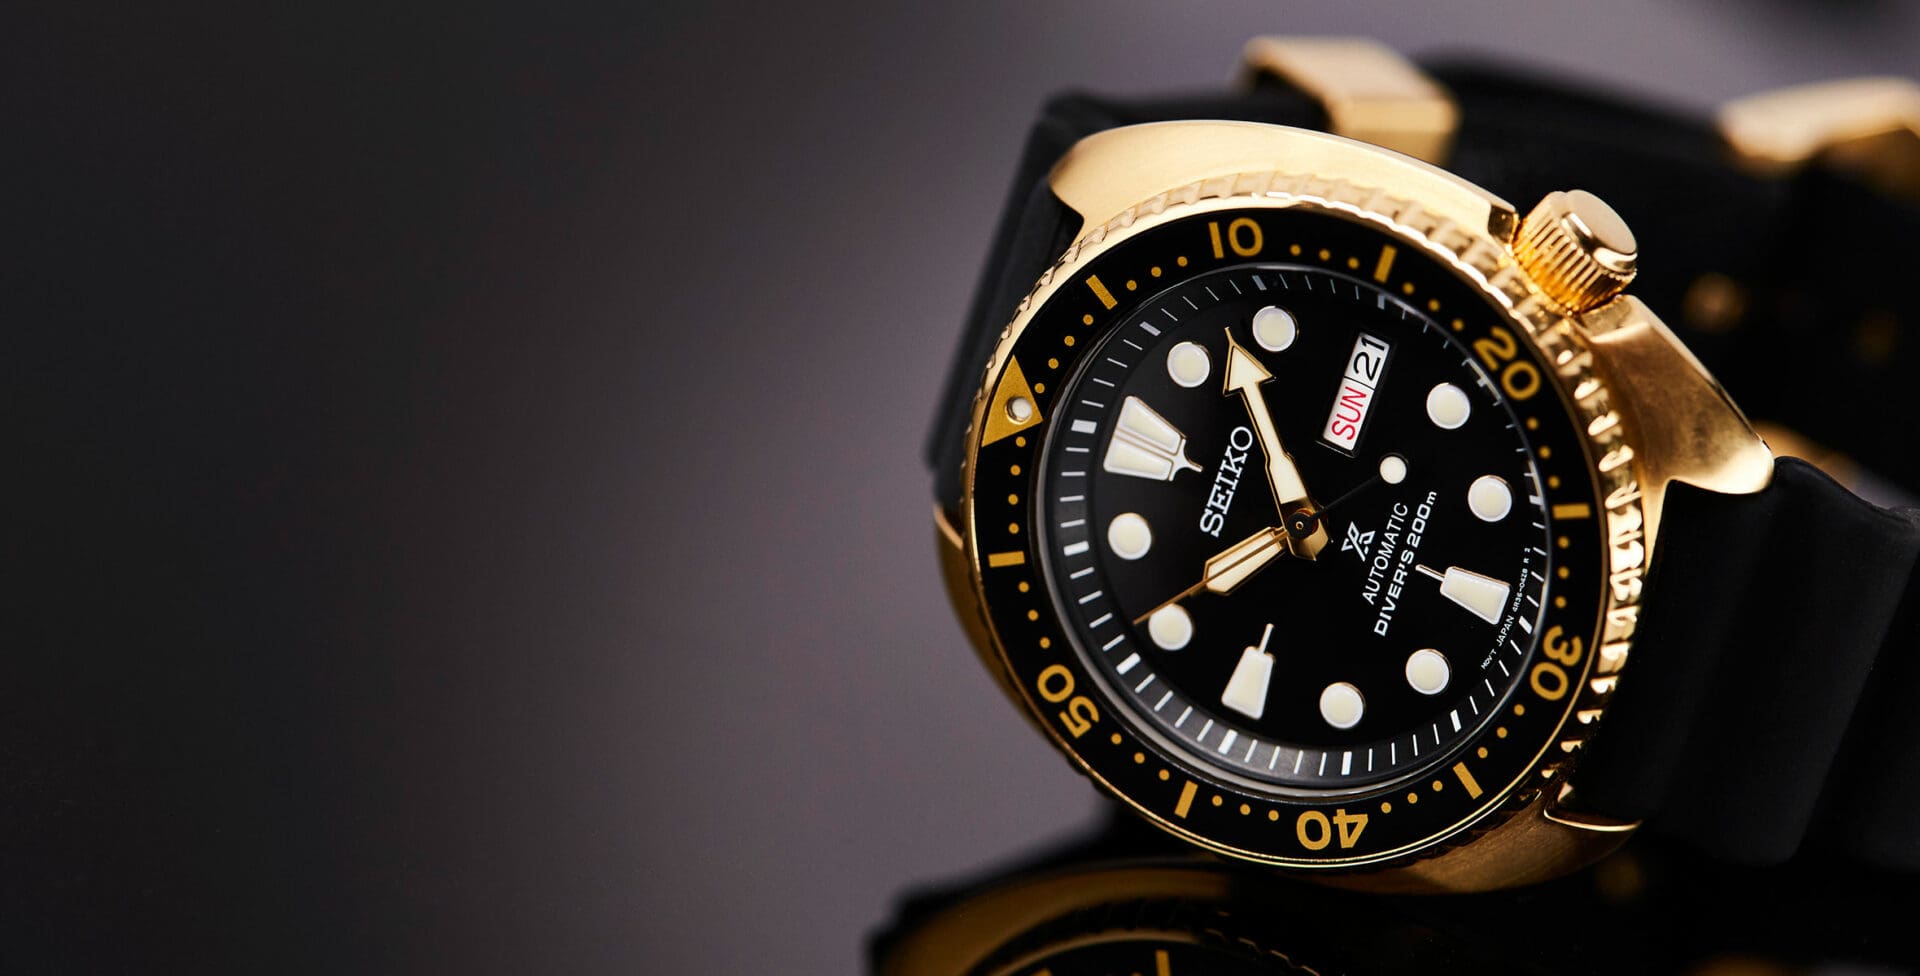 HANDS-ON: The Golden Turtle – Seiko’s Prospex SRPC44